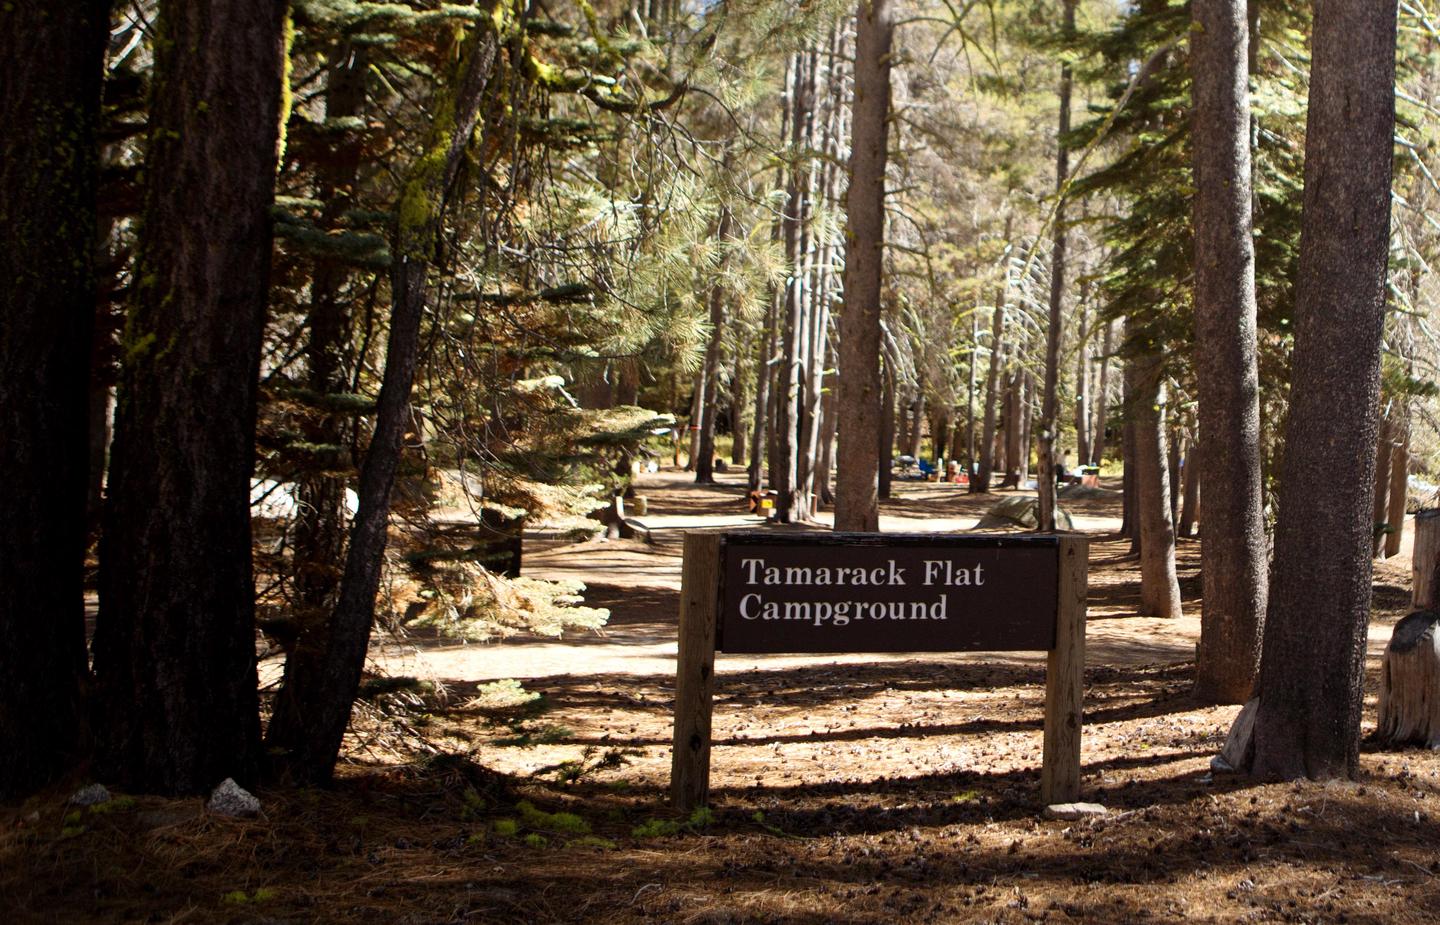 Preview photo of Tamarack Flat Campground